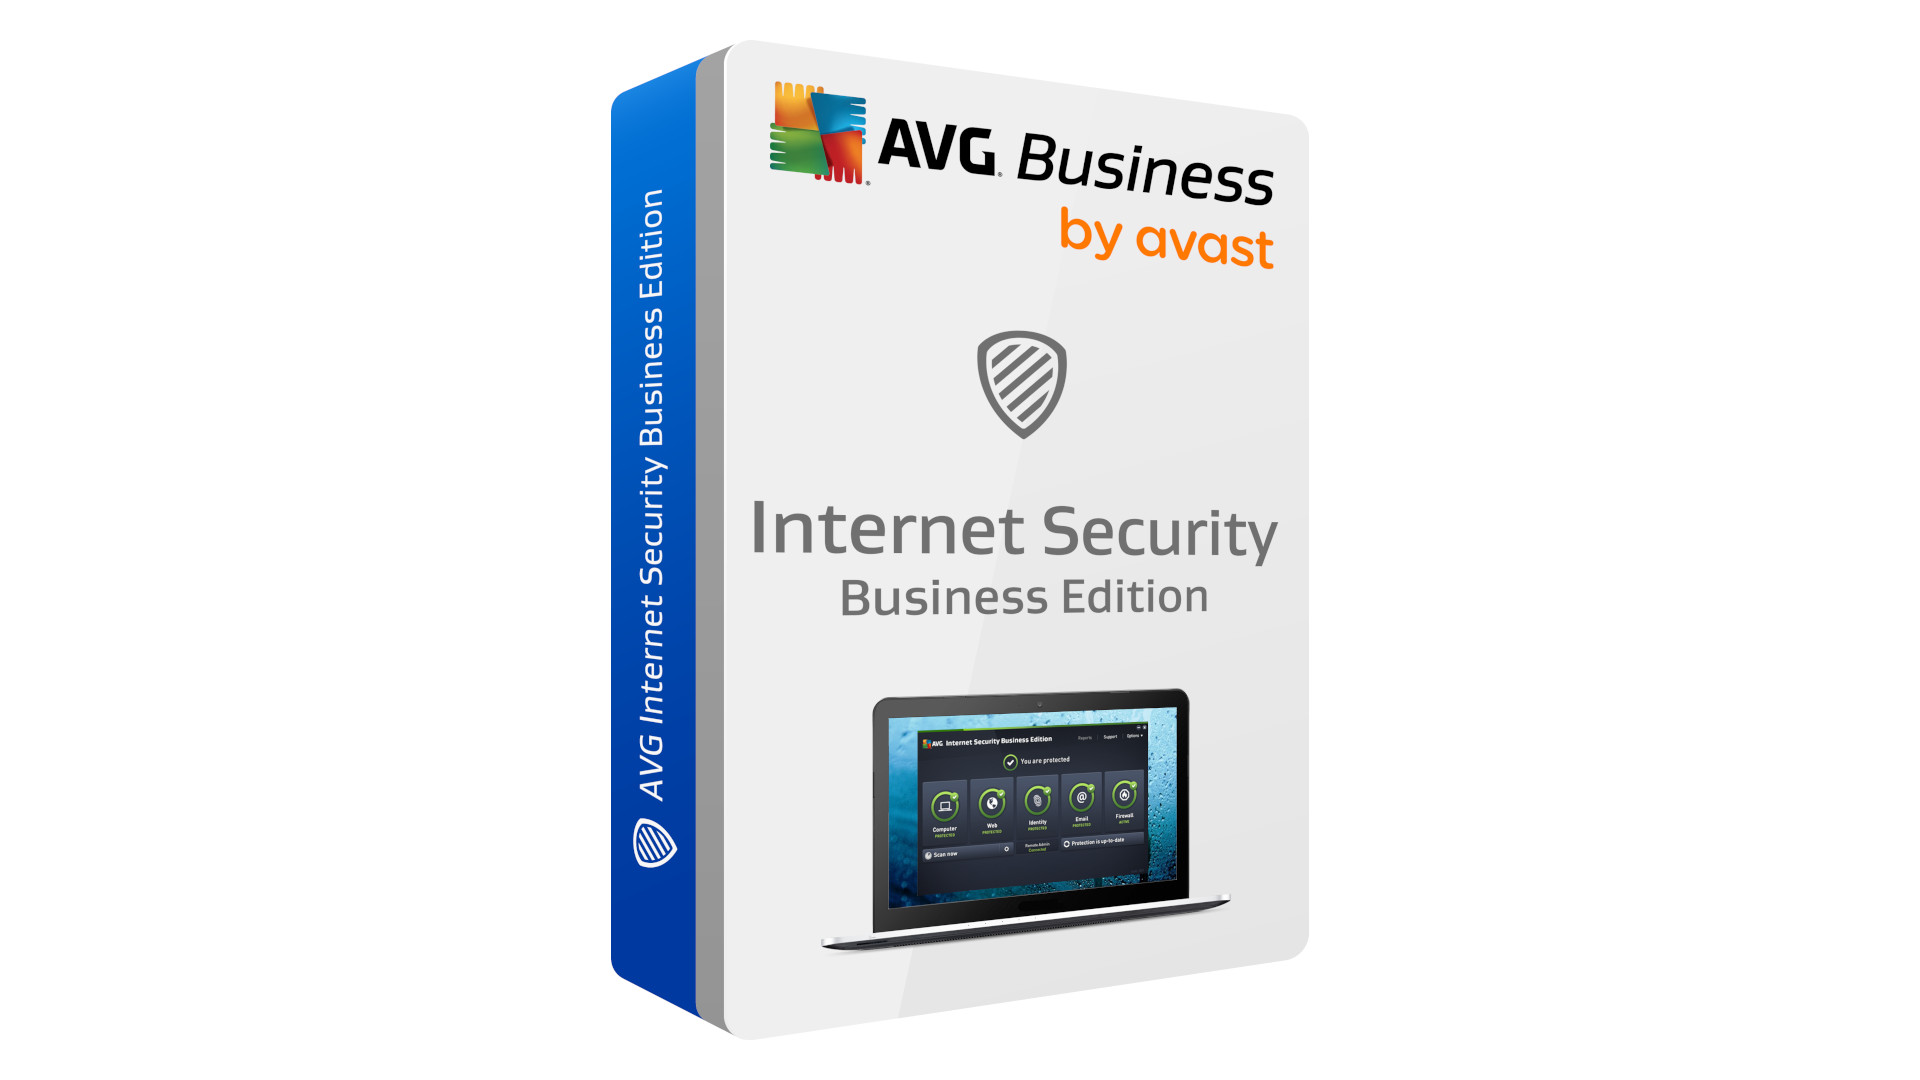 AVG Internet Security Business Edition 2022 Key (1 Year / 1 Device) 21.47 $